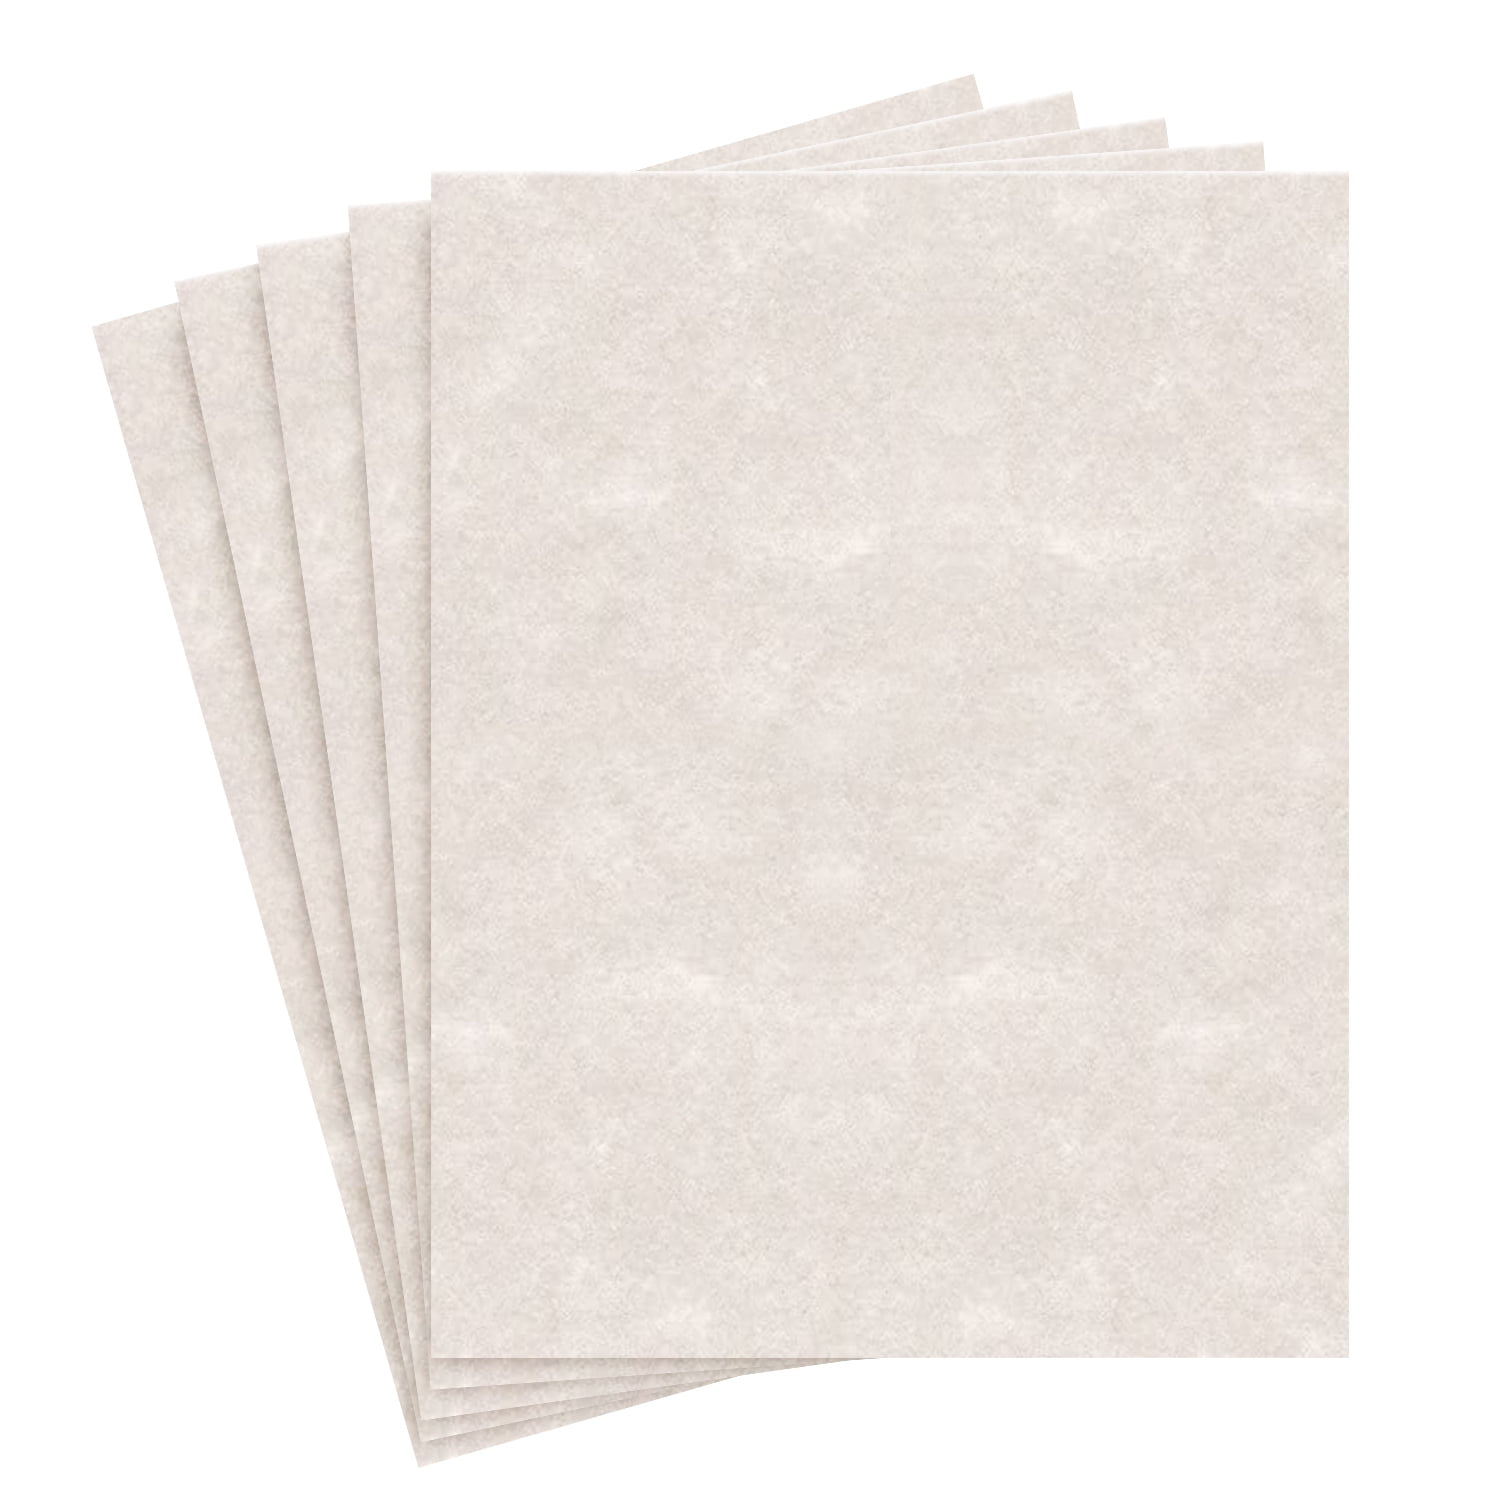 11X17 Inches 60 lb/Pound is Not Card Weight =24# Bond Paper Sheets Vintage Colored Old Parchment Semblance 50 Light Brown Parchment 60# Text Tabloid|Ledger|Booklet Size 11 X 17